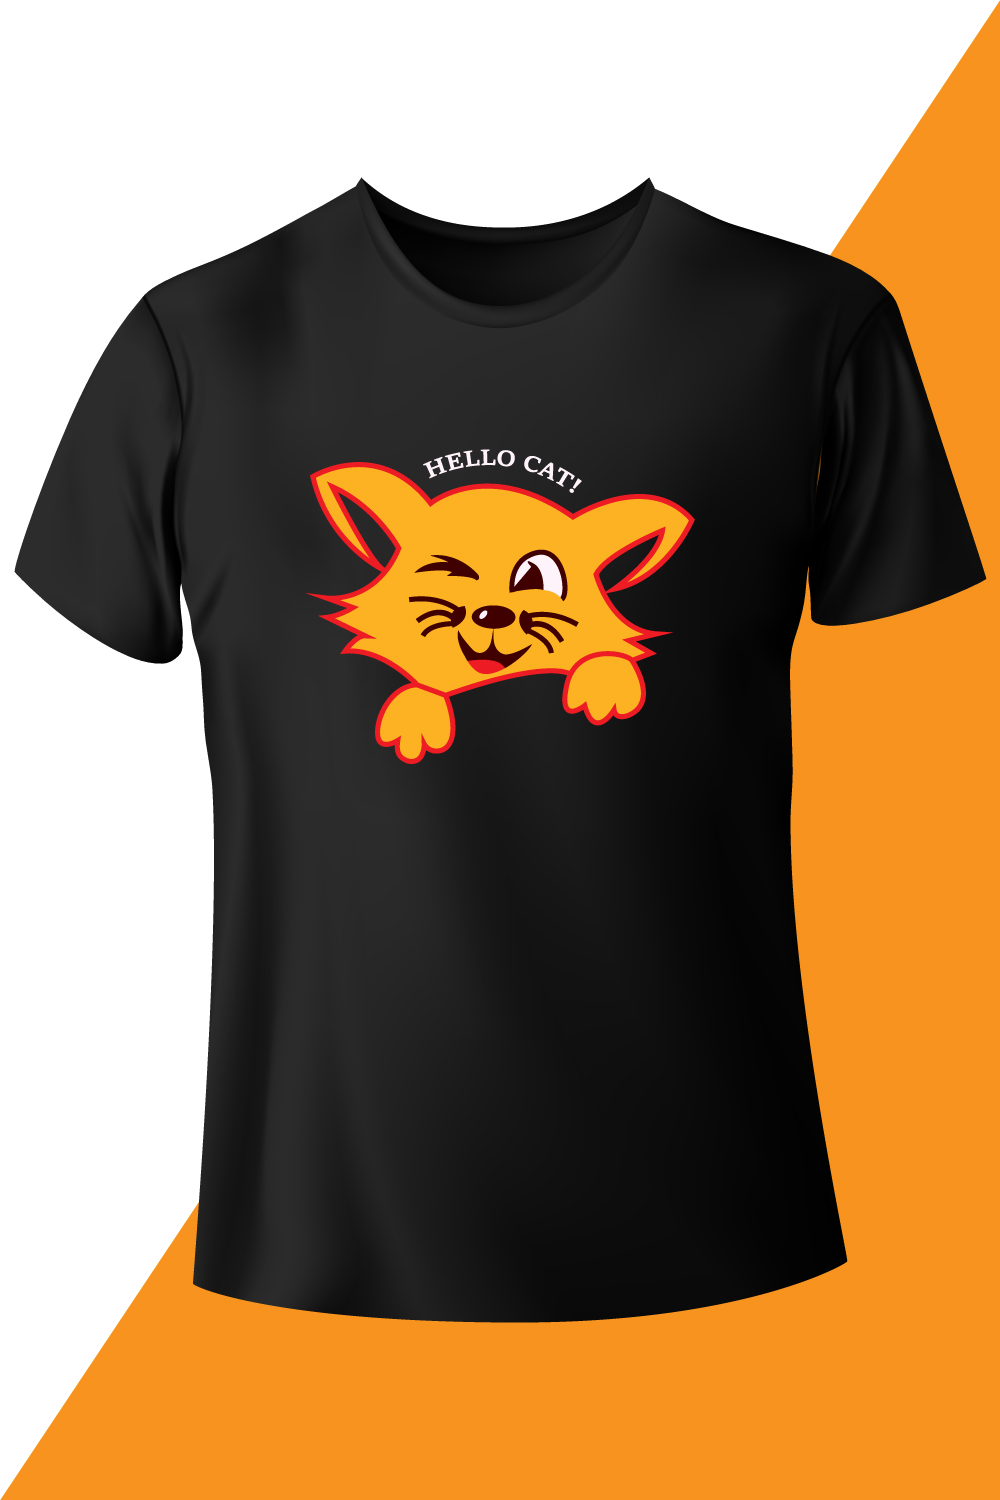 Image of a black t-shirt with a colorful print of a cat.